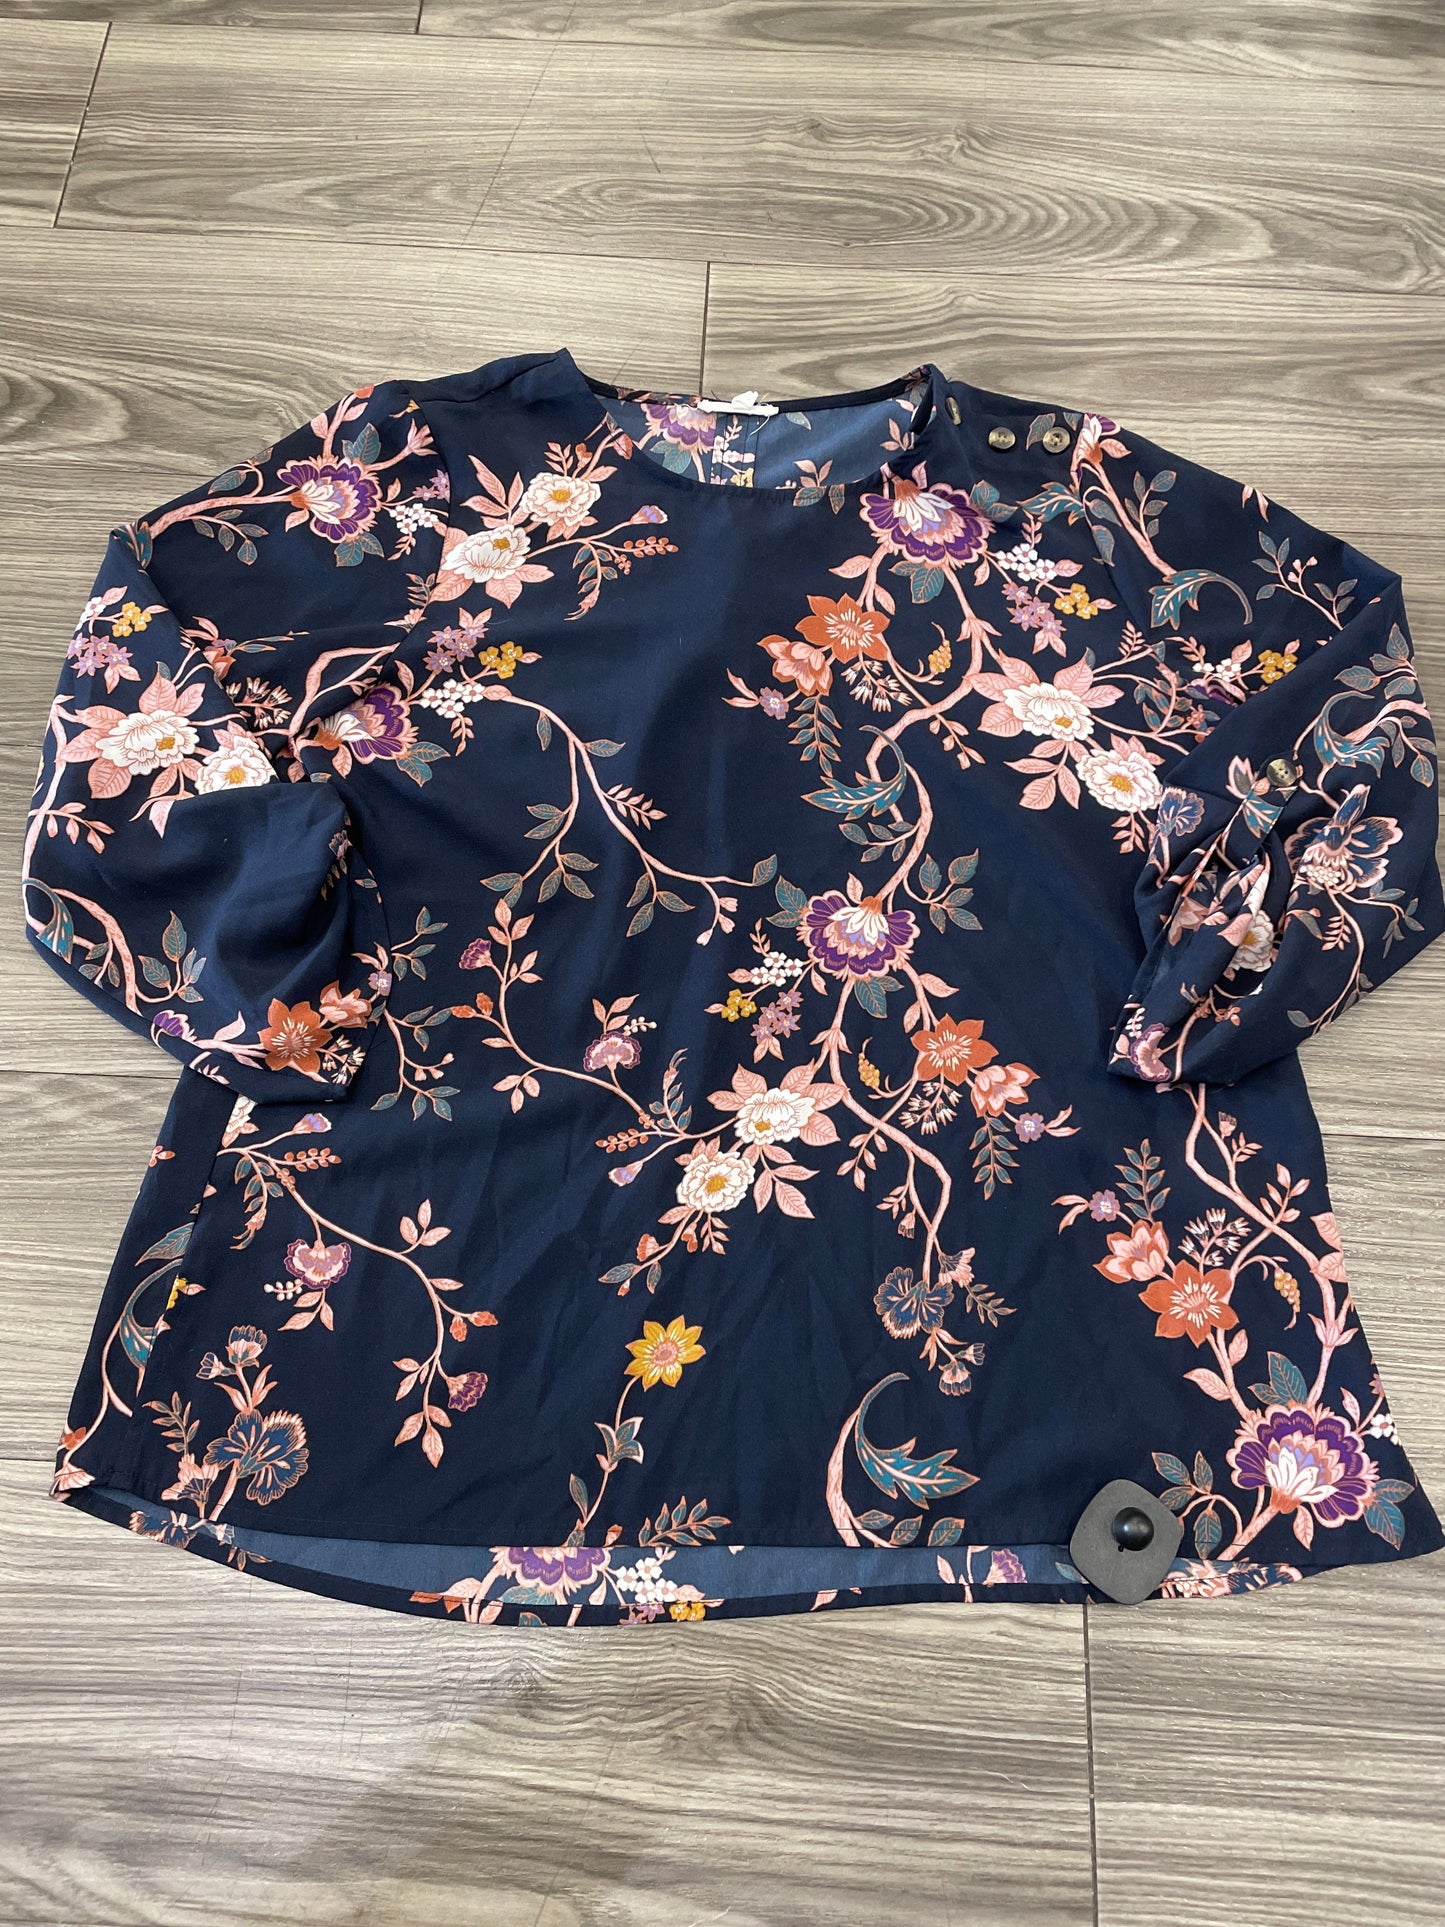 Floral Print Top Long Sleeve Maurices, Size L